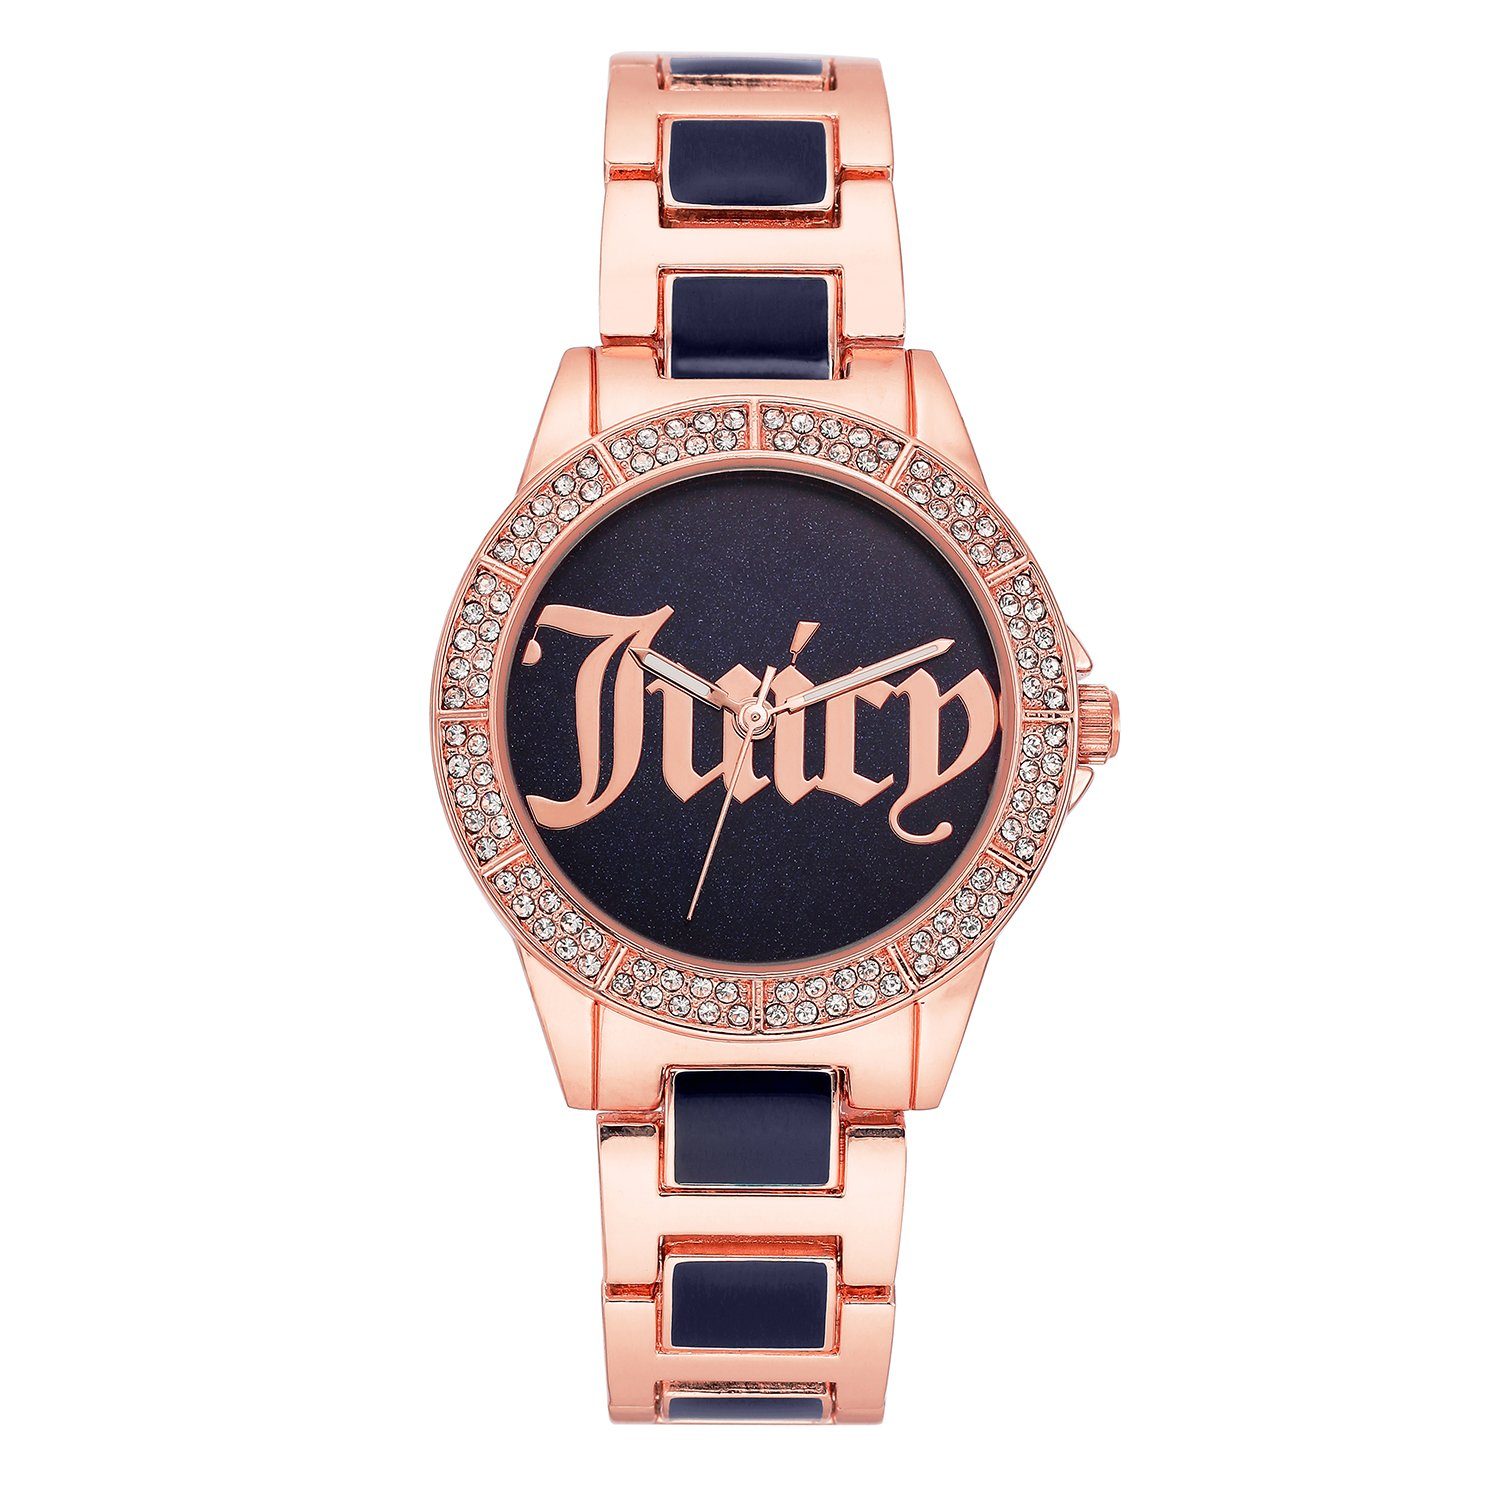 Juicy Couture Digitaluhr JC/1308NVRG